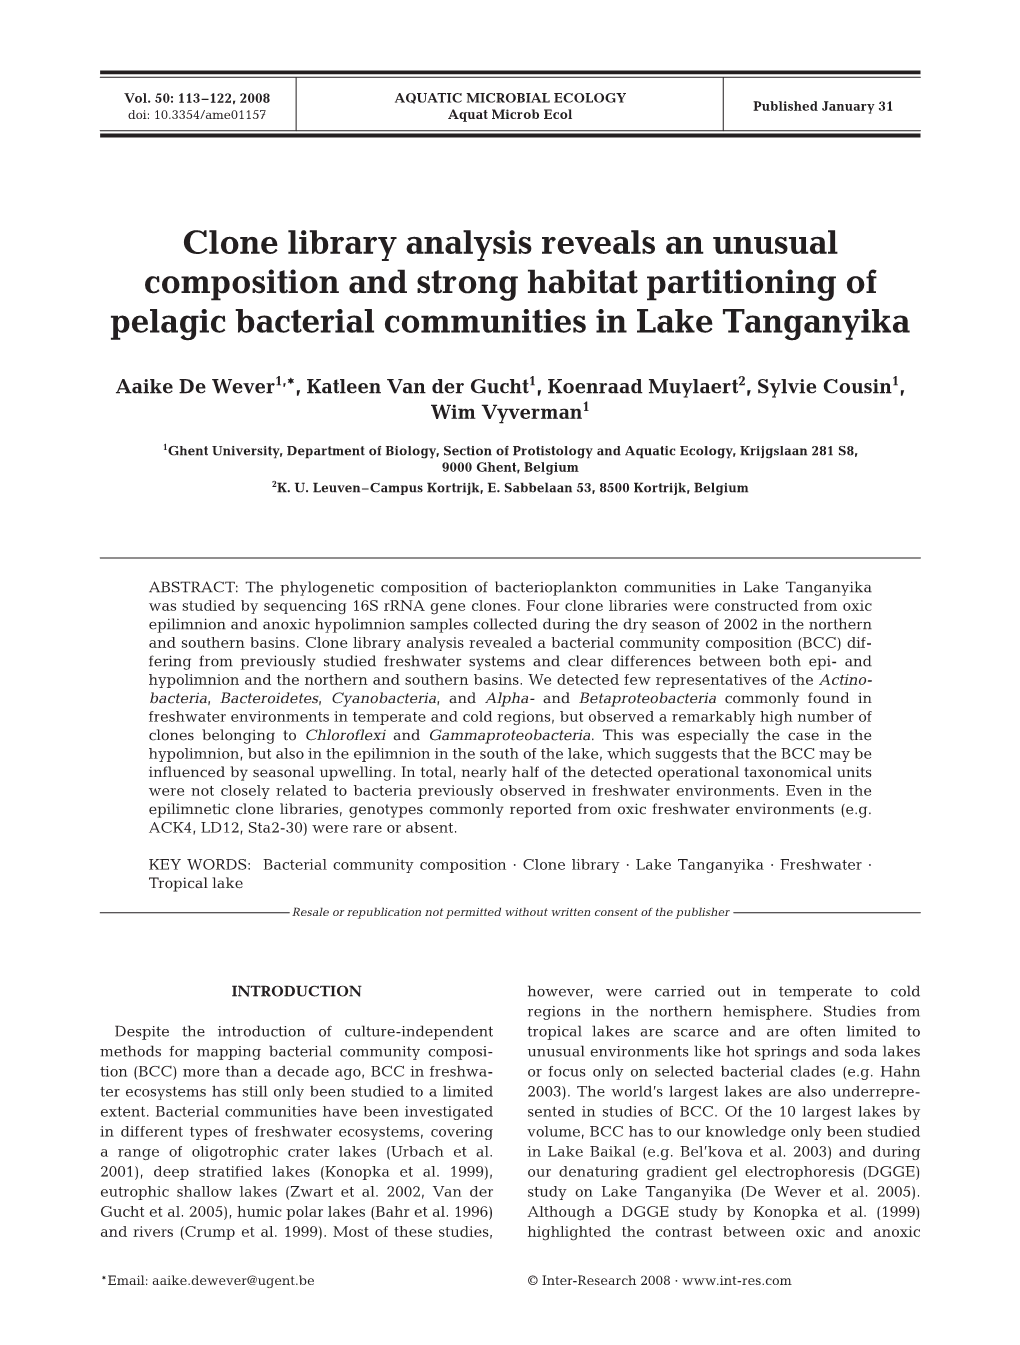 Clone Library Analysis Reveals an Unusual Composition and Strong Habitat Partitioning of Pelagic Bacterial Communities in Lake Tanganyika